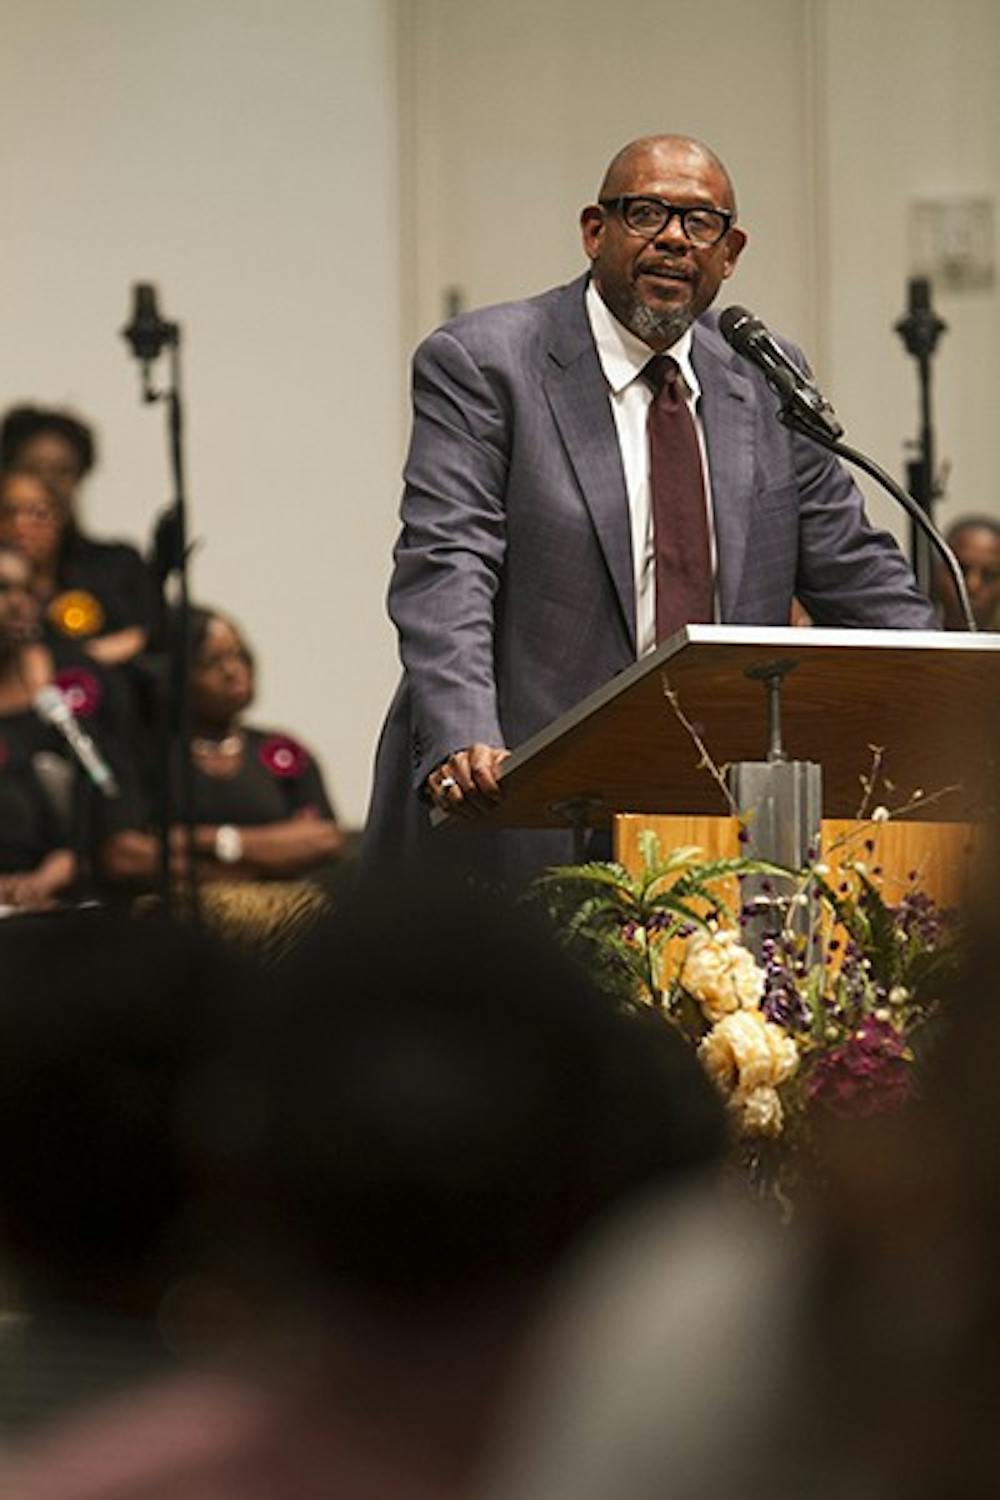 Critically acclaimed actor, director and humanitarian Forest Whitaker spoke about the importance of living in the moment and changing one’s realities at the inaugural Delivering Democracy Lecture on Tuesday night.



The Center for the Study of Race and Democracy hosted the lecture, which took place at Pilgrim Rest Baptist Church, and had an audience of about 2,200 people who came to listen to Whitaker’s speech. (Photo by Sean Logan)